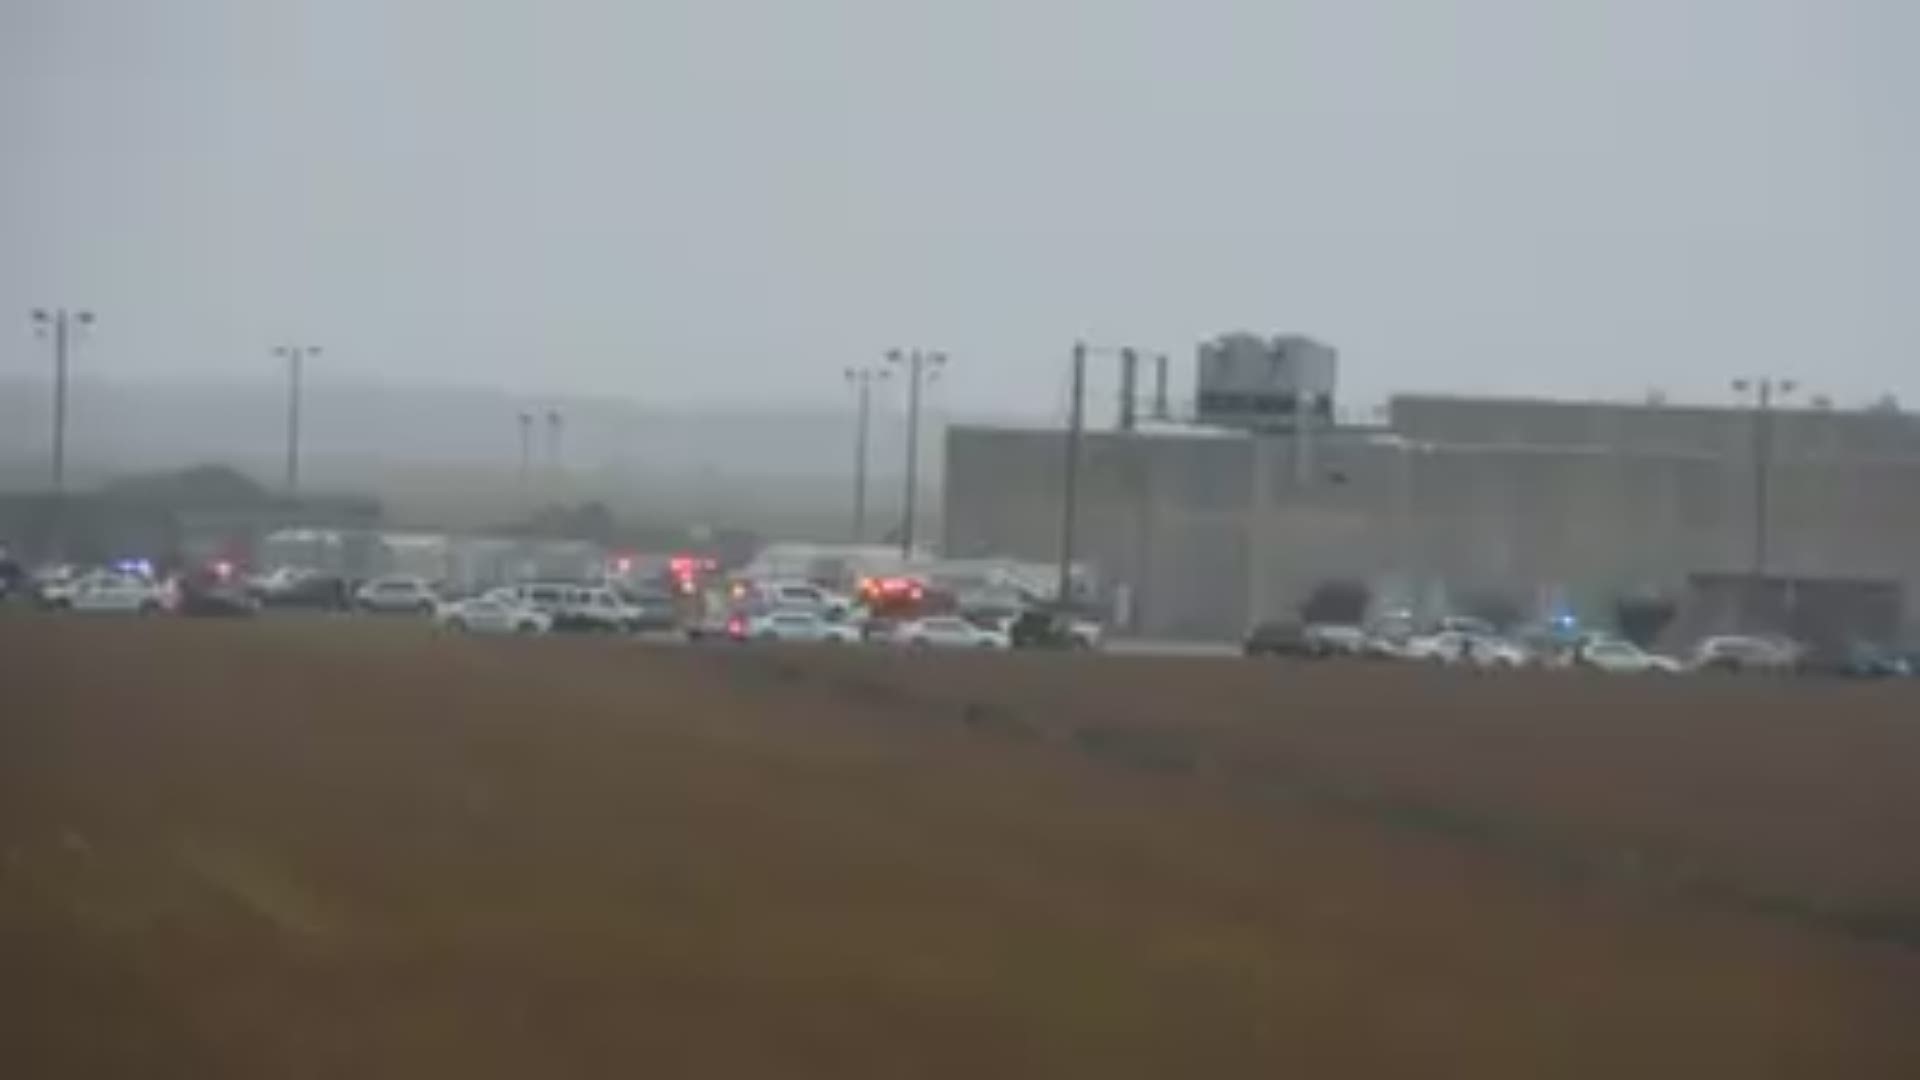 Raw footage of the scene where prisoners attempted to escape an N.C. prison, killing two people